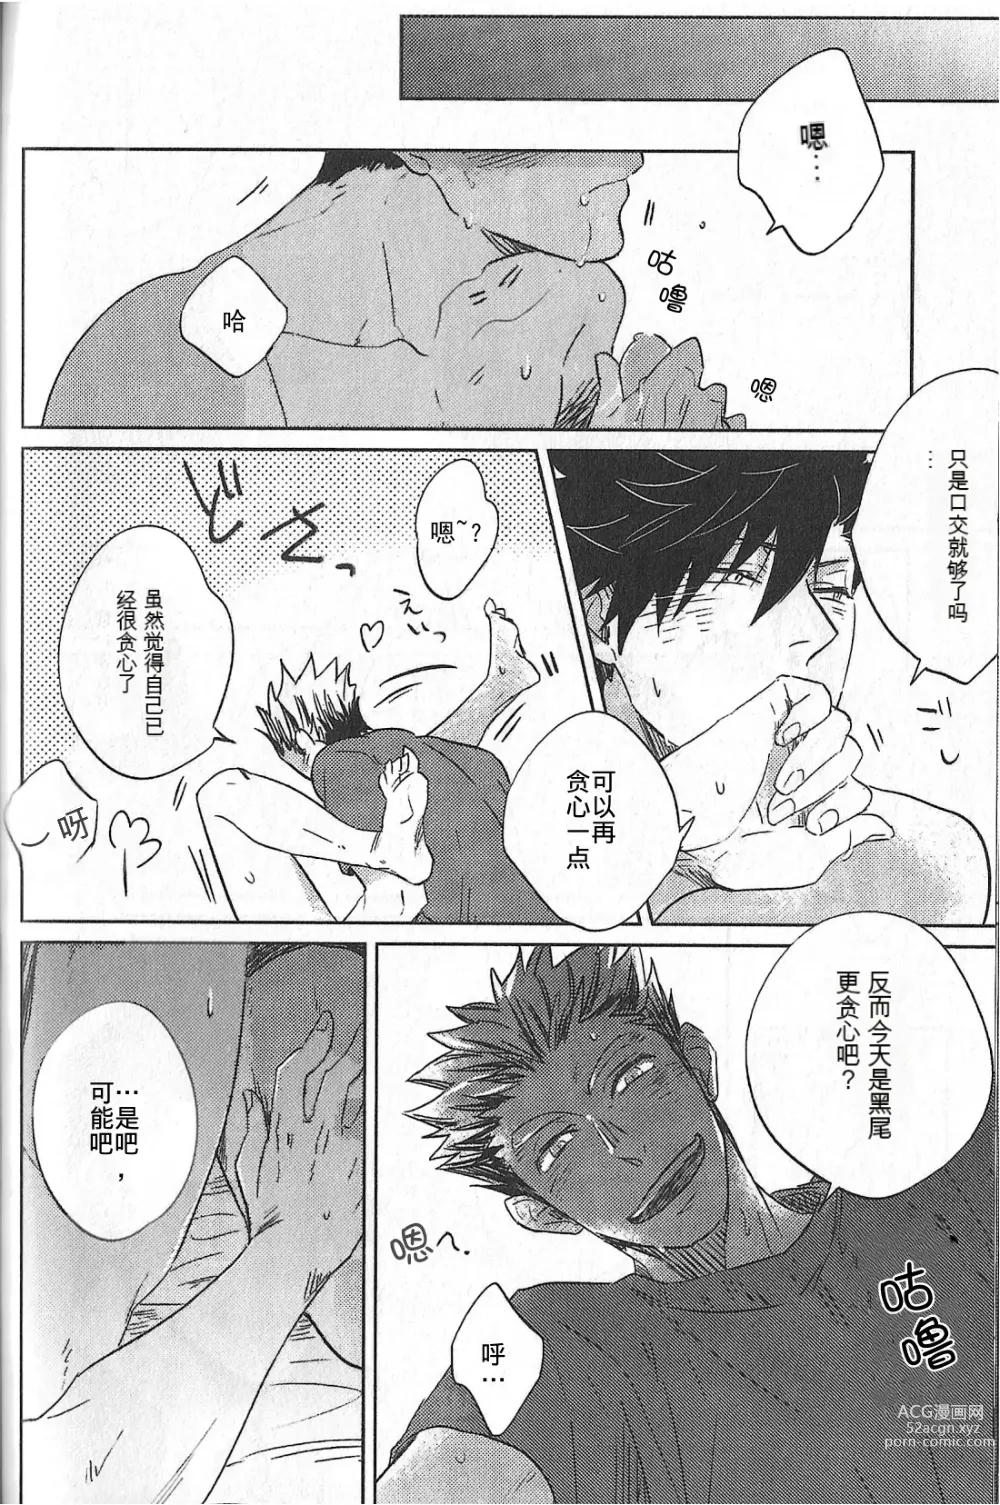 Page 7 of doujinshi 极境的野兽 后篇